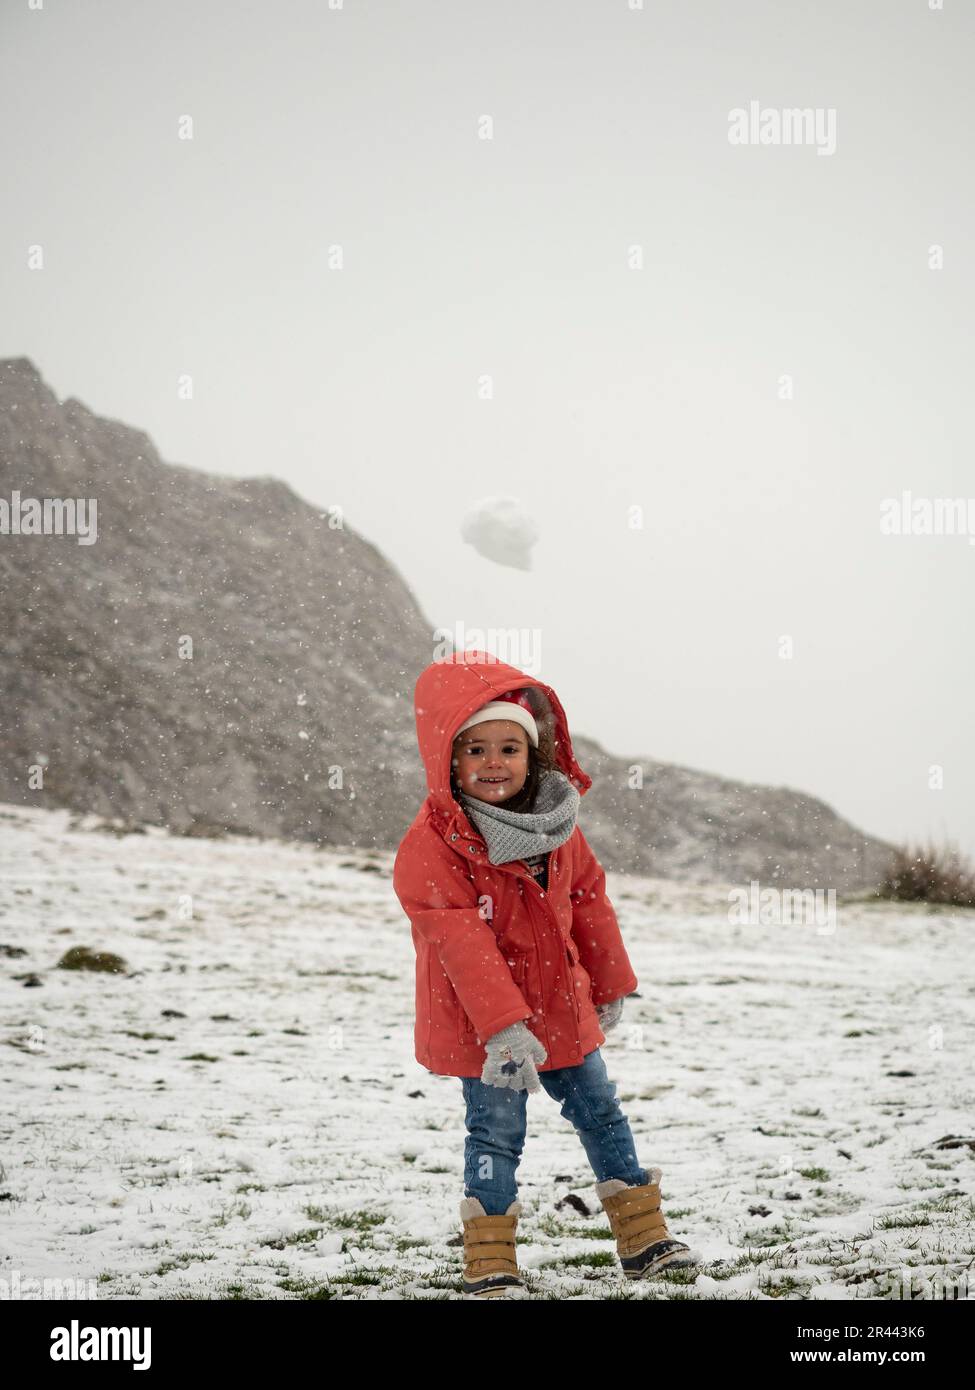 little girl throwing snowball Stock Photo